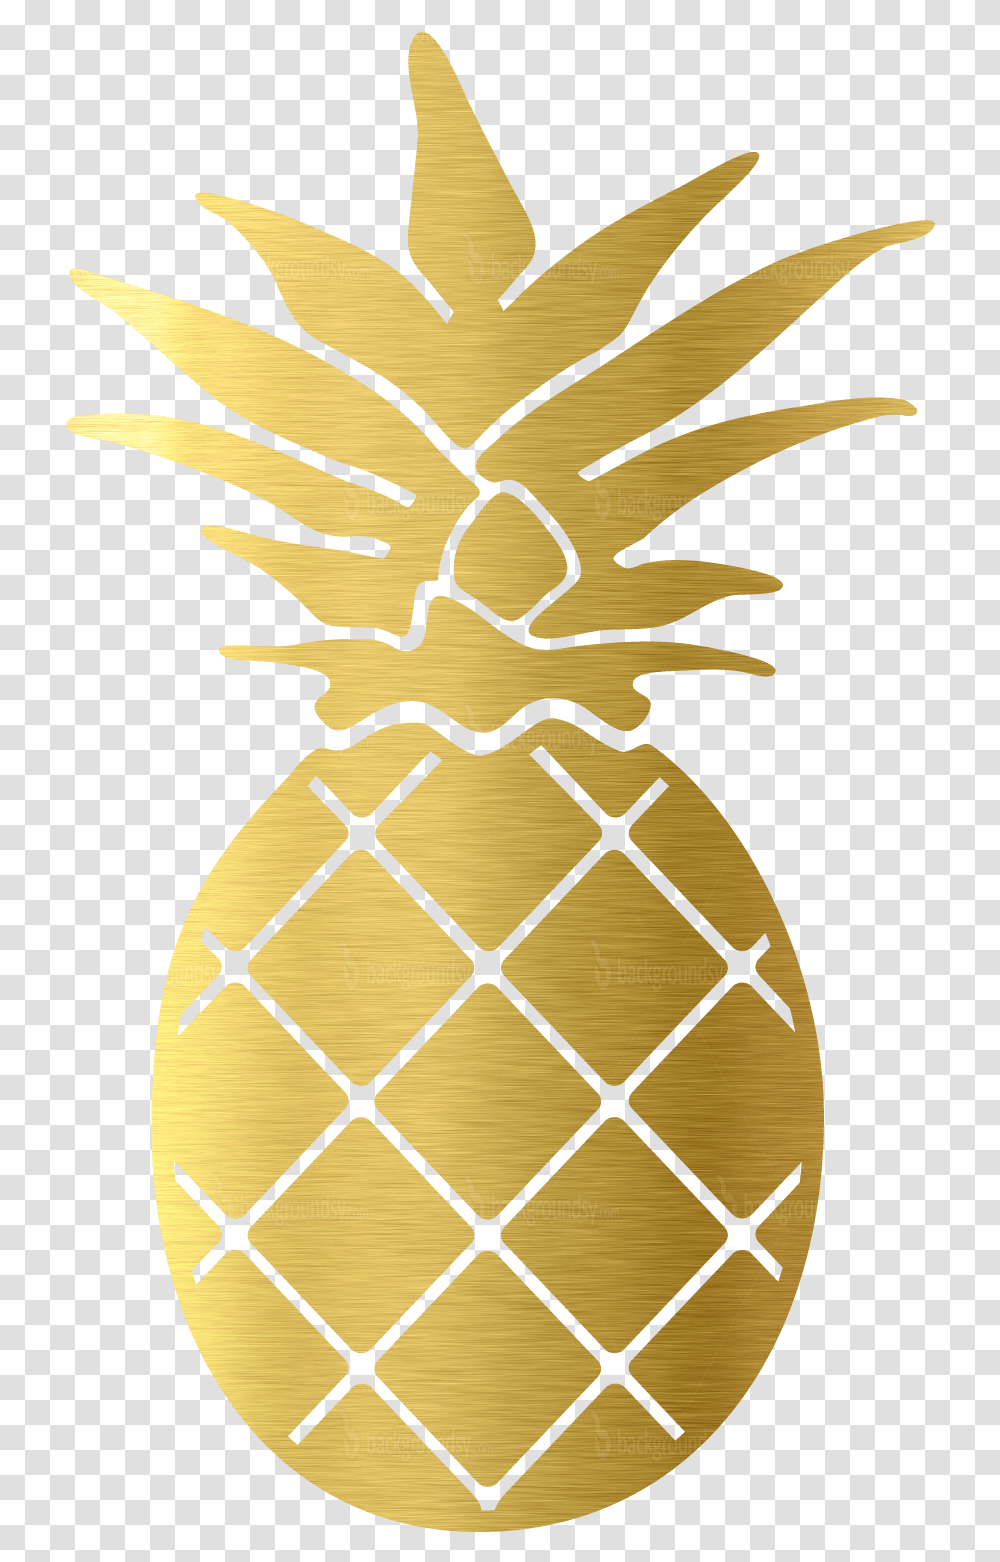 Pineapple Decal Sticker Clip Art Pineapple Decal, Bird, Animal, Trophy, Gold Transparent Png